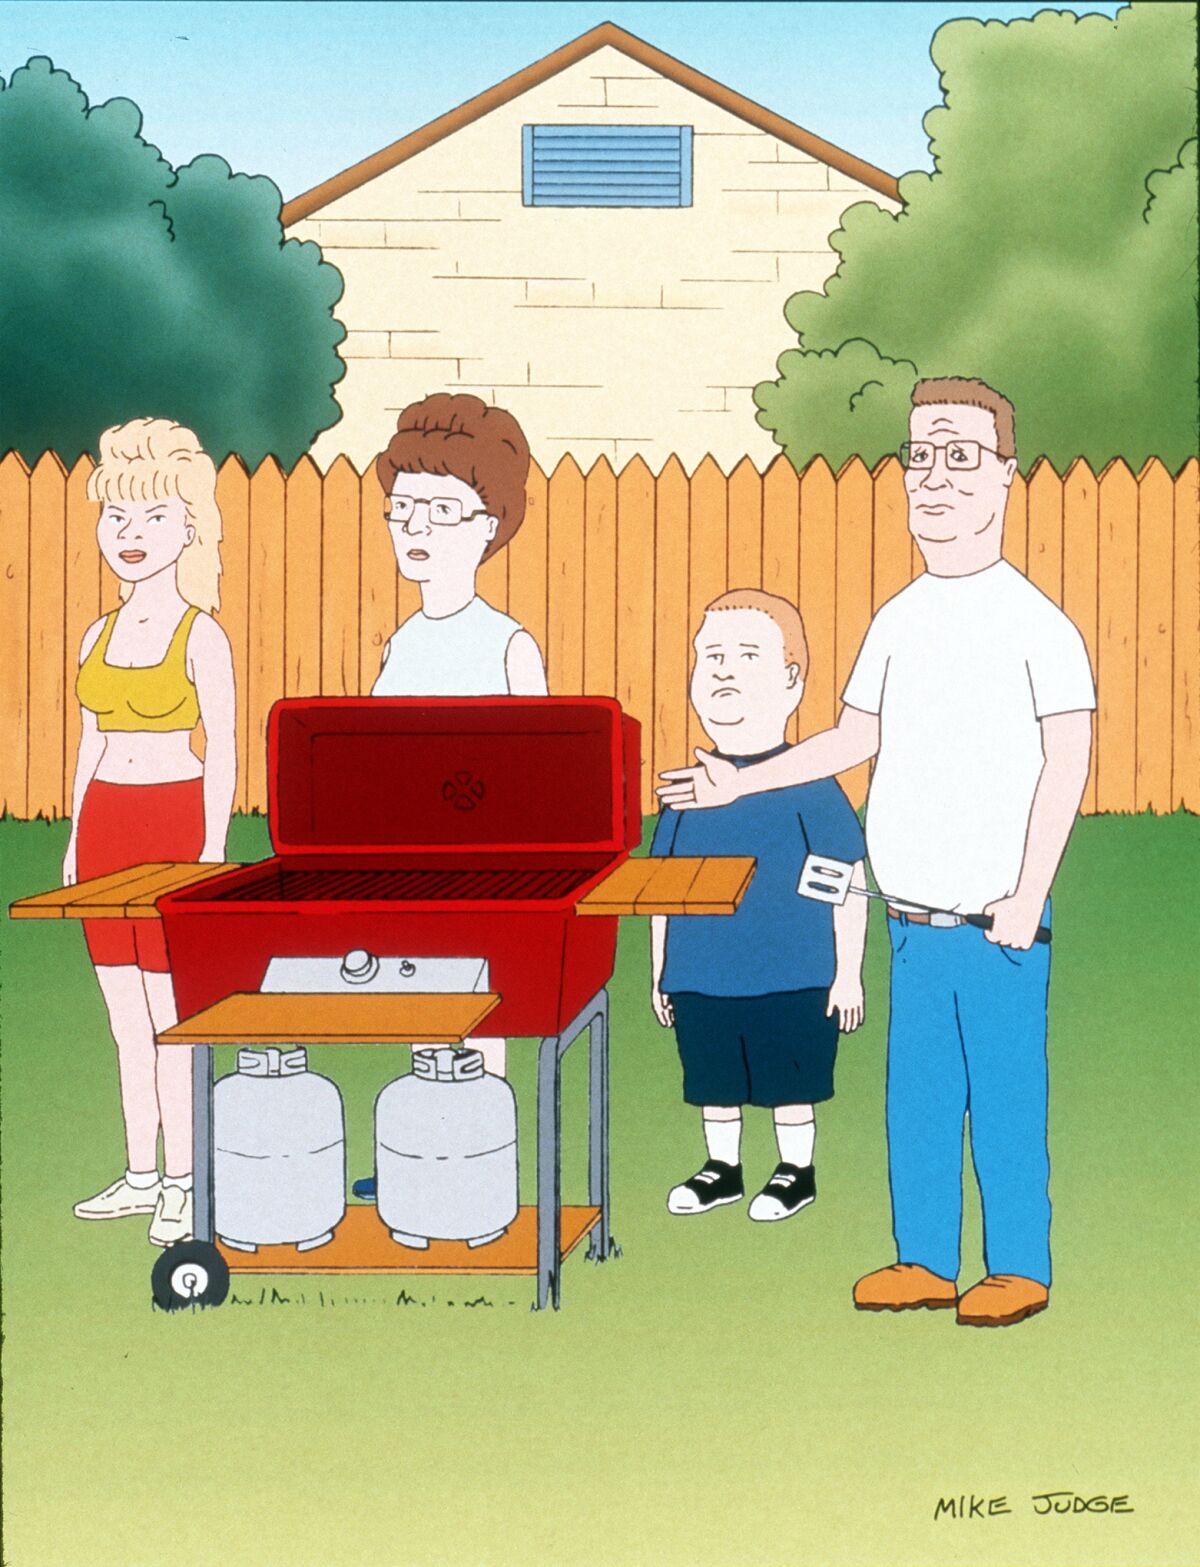 A scene from the animated comedy “King of the Hill.”